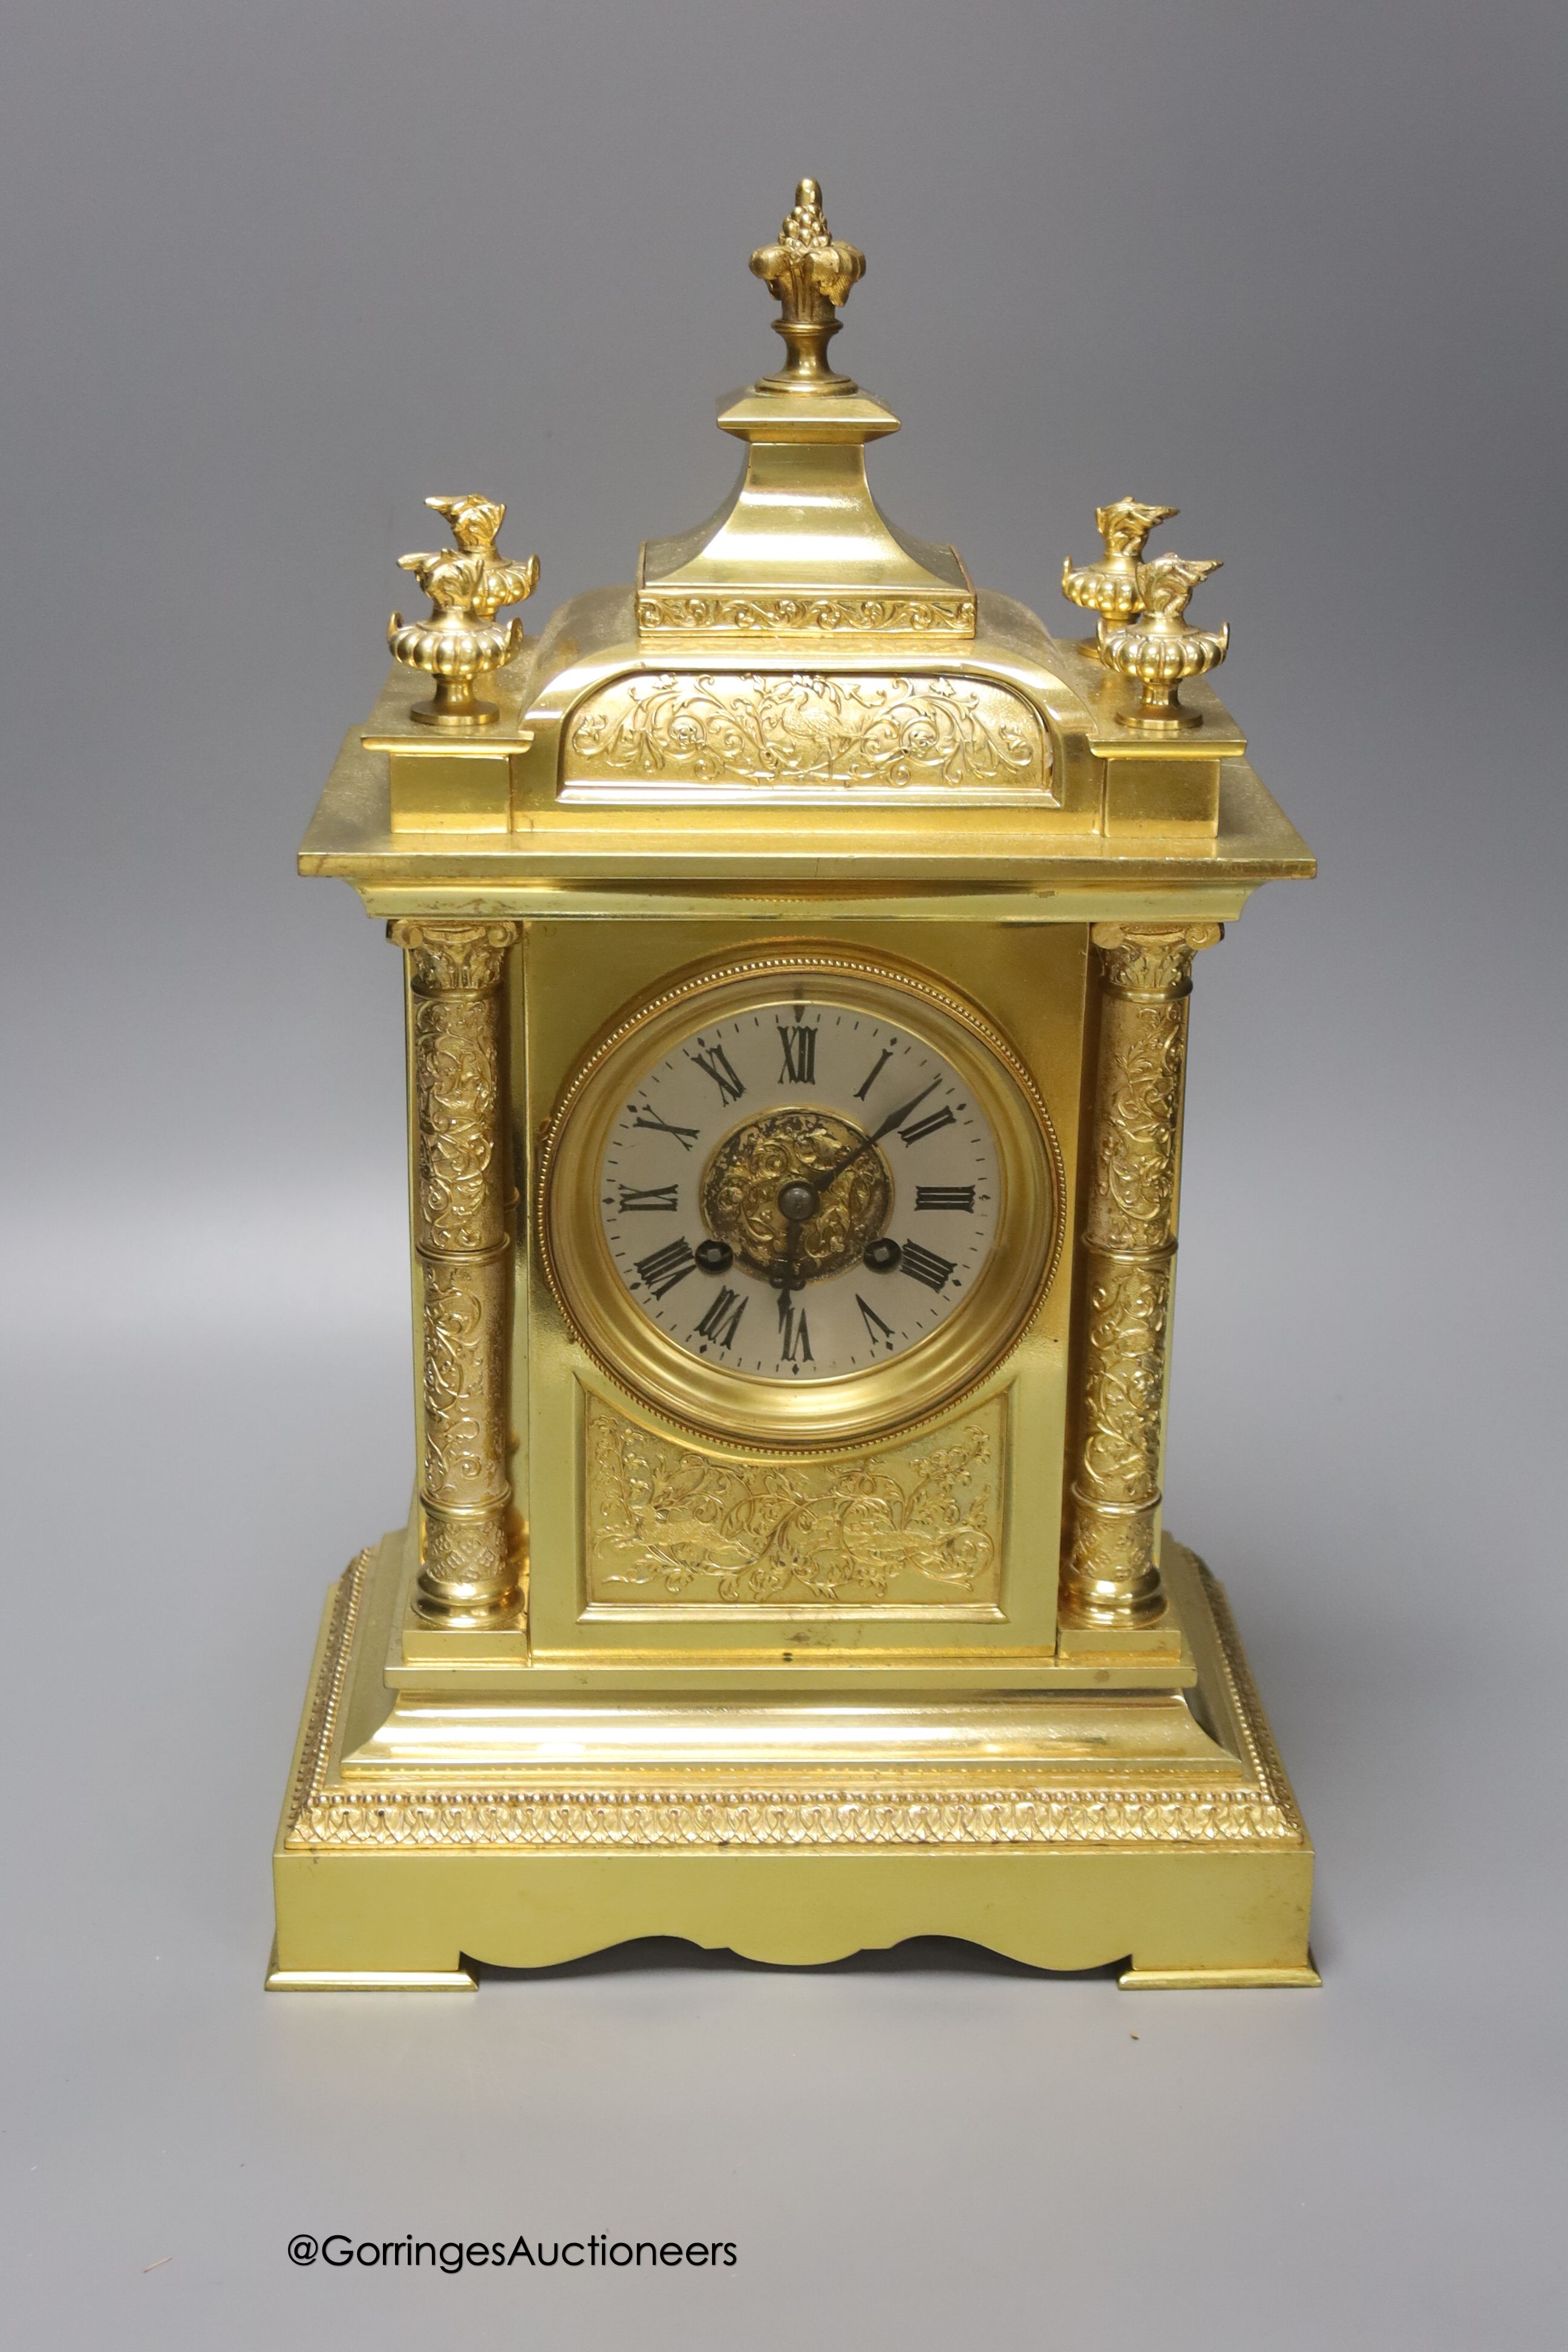 A Victorian architectural ormolu mantel clock, c.1860's, French gong striking movement, height 39cm